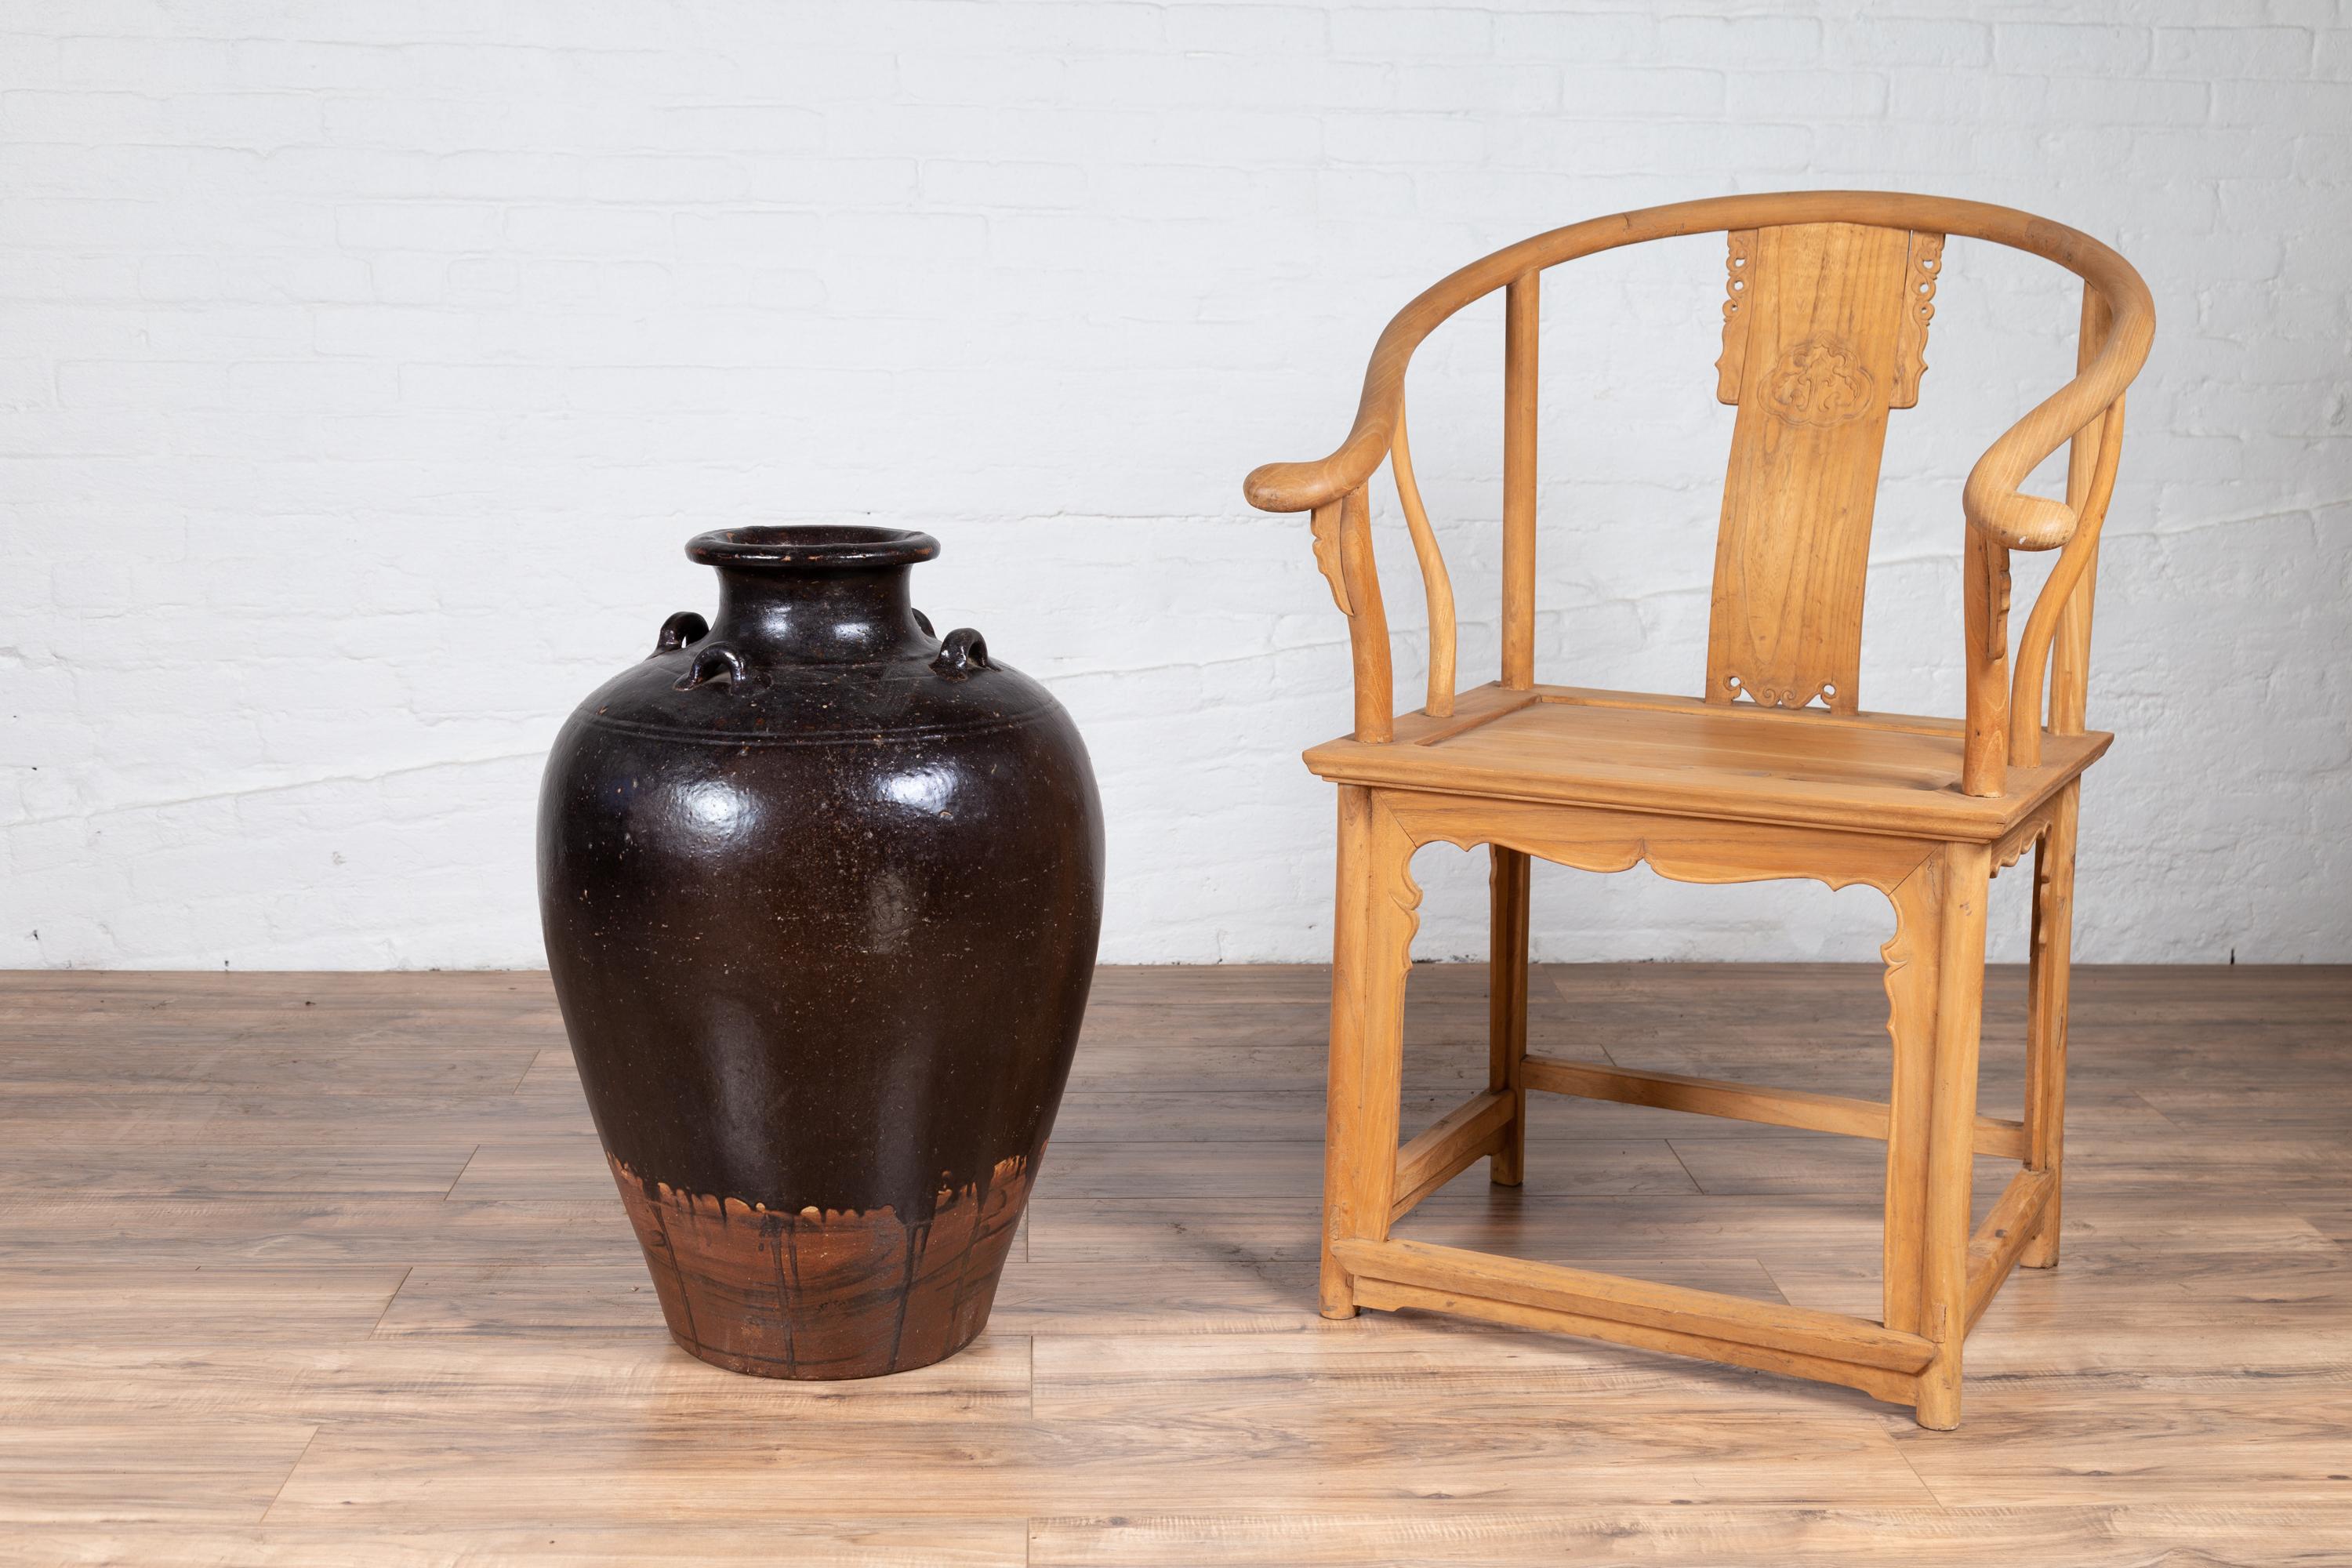 An antique Thai monochrome brownware water jar from the early 20th century, with carrying handles. Born in Thailand during the early years of the 20th century, this charming water jug features a cylindrical tapering body boasting a monochrome